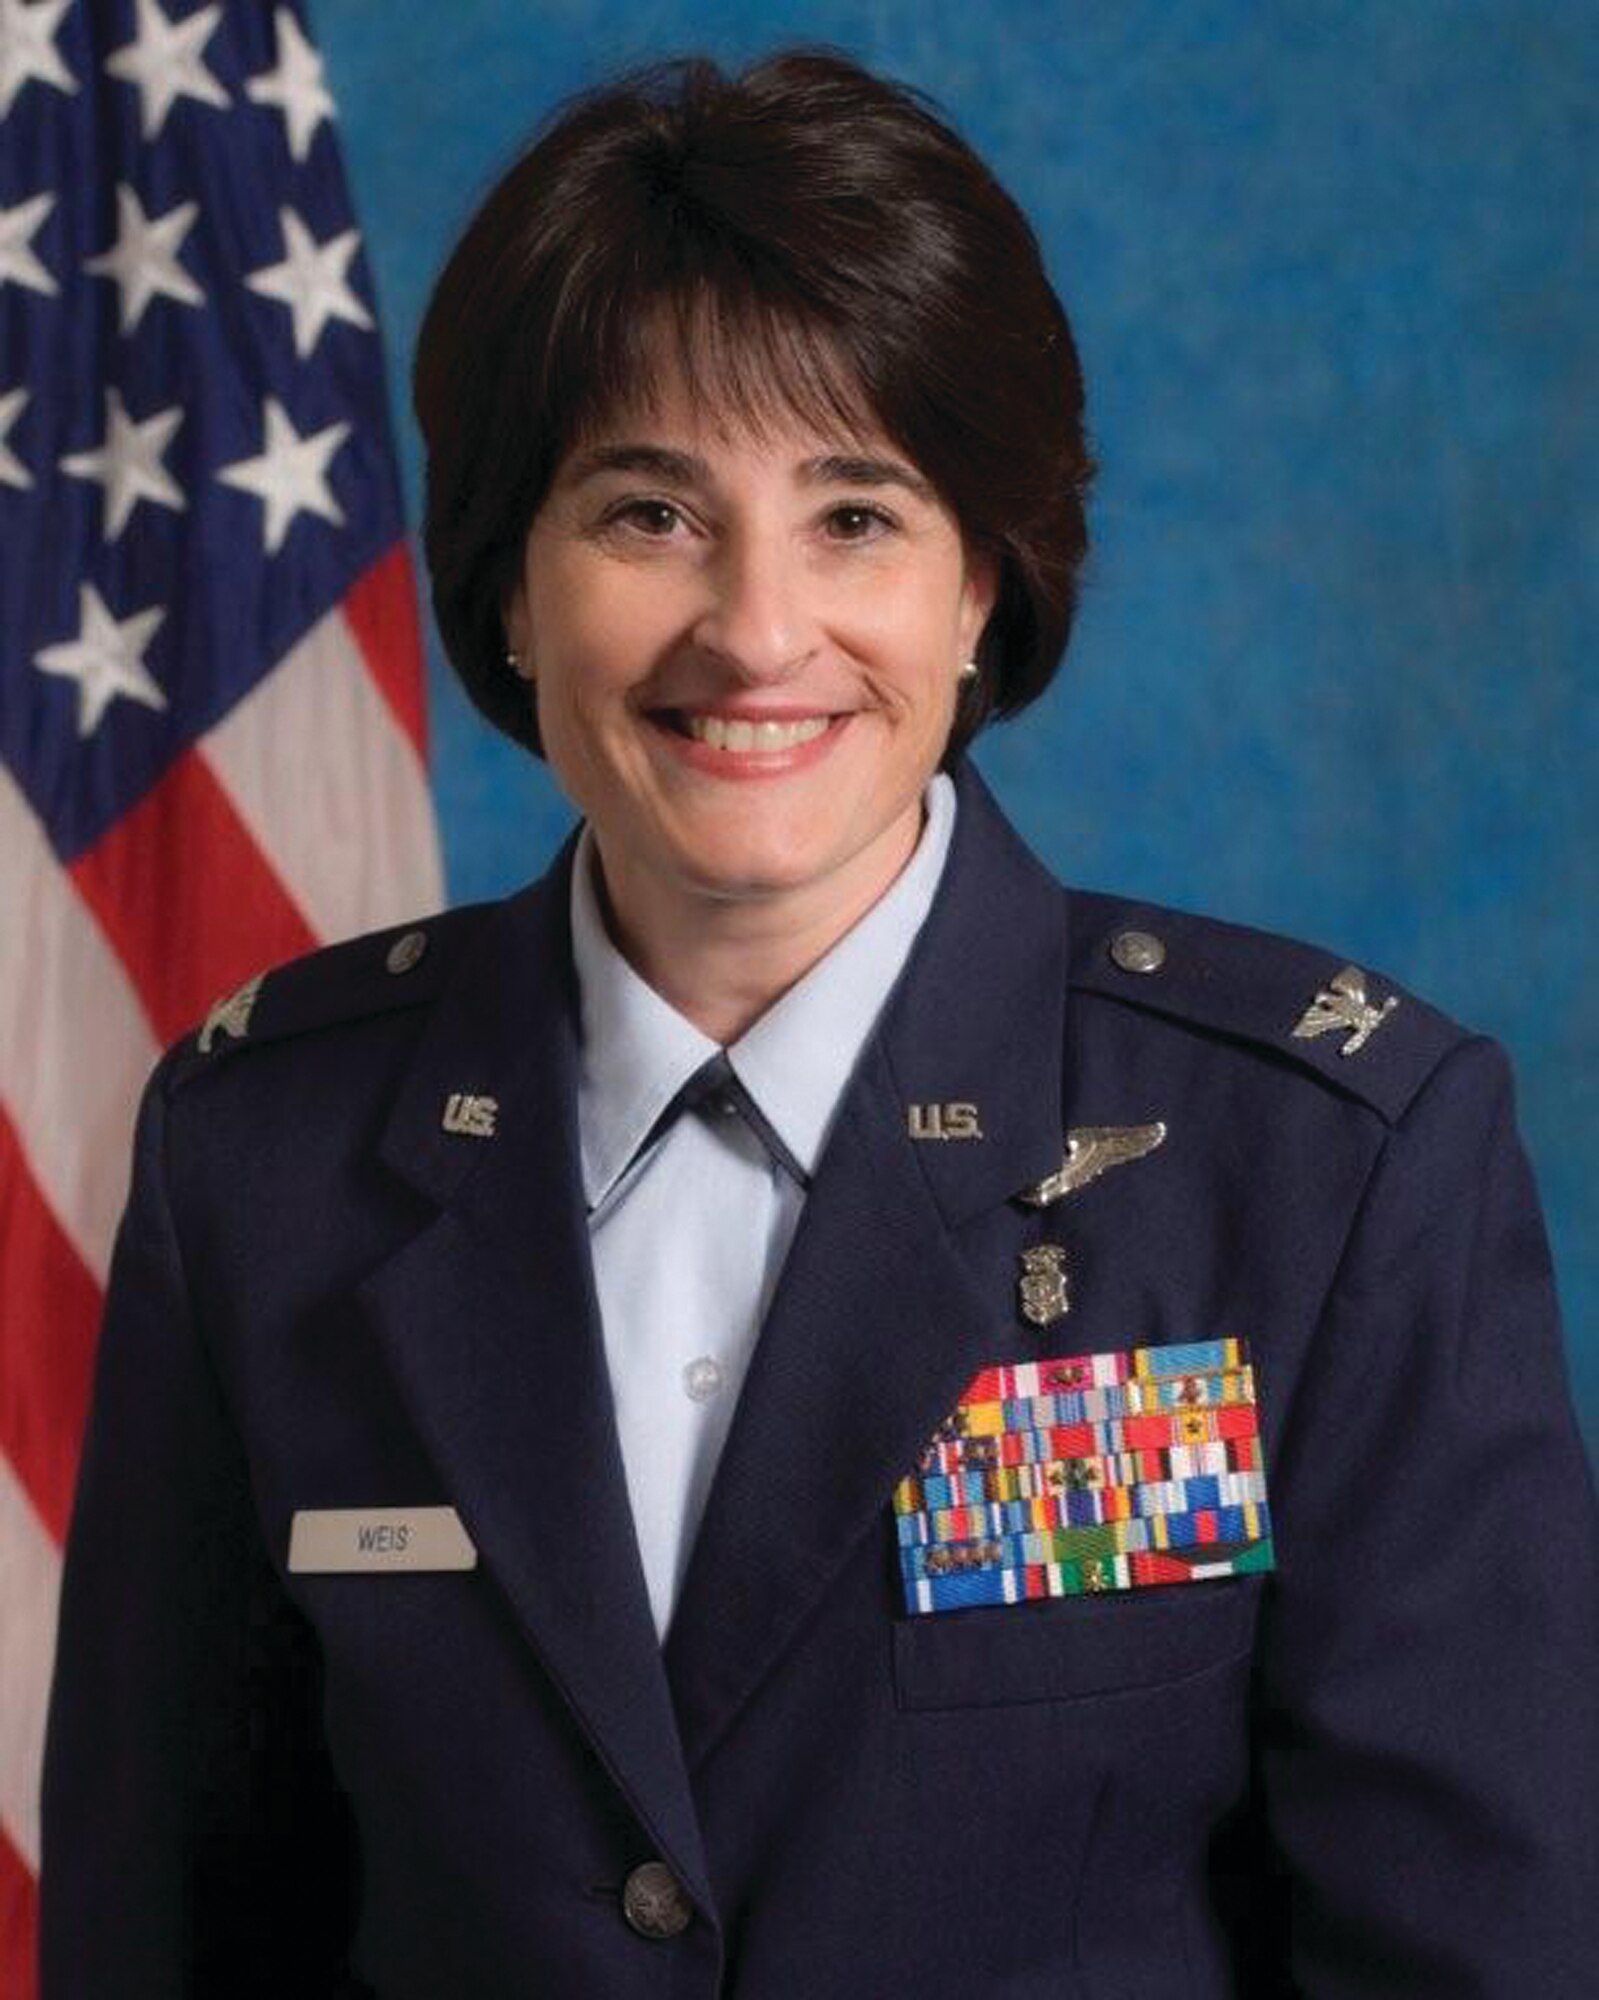 Colonel Karen Weis achieved one of nursing’s highest honors by being inducted as a Fellow into the American Academy of Nursing.  (Air Force image)